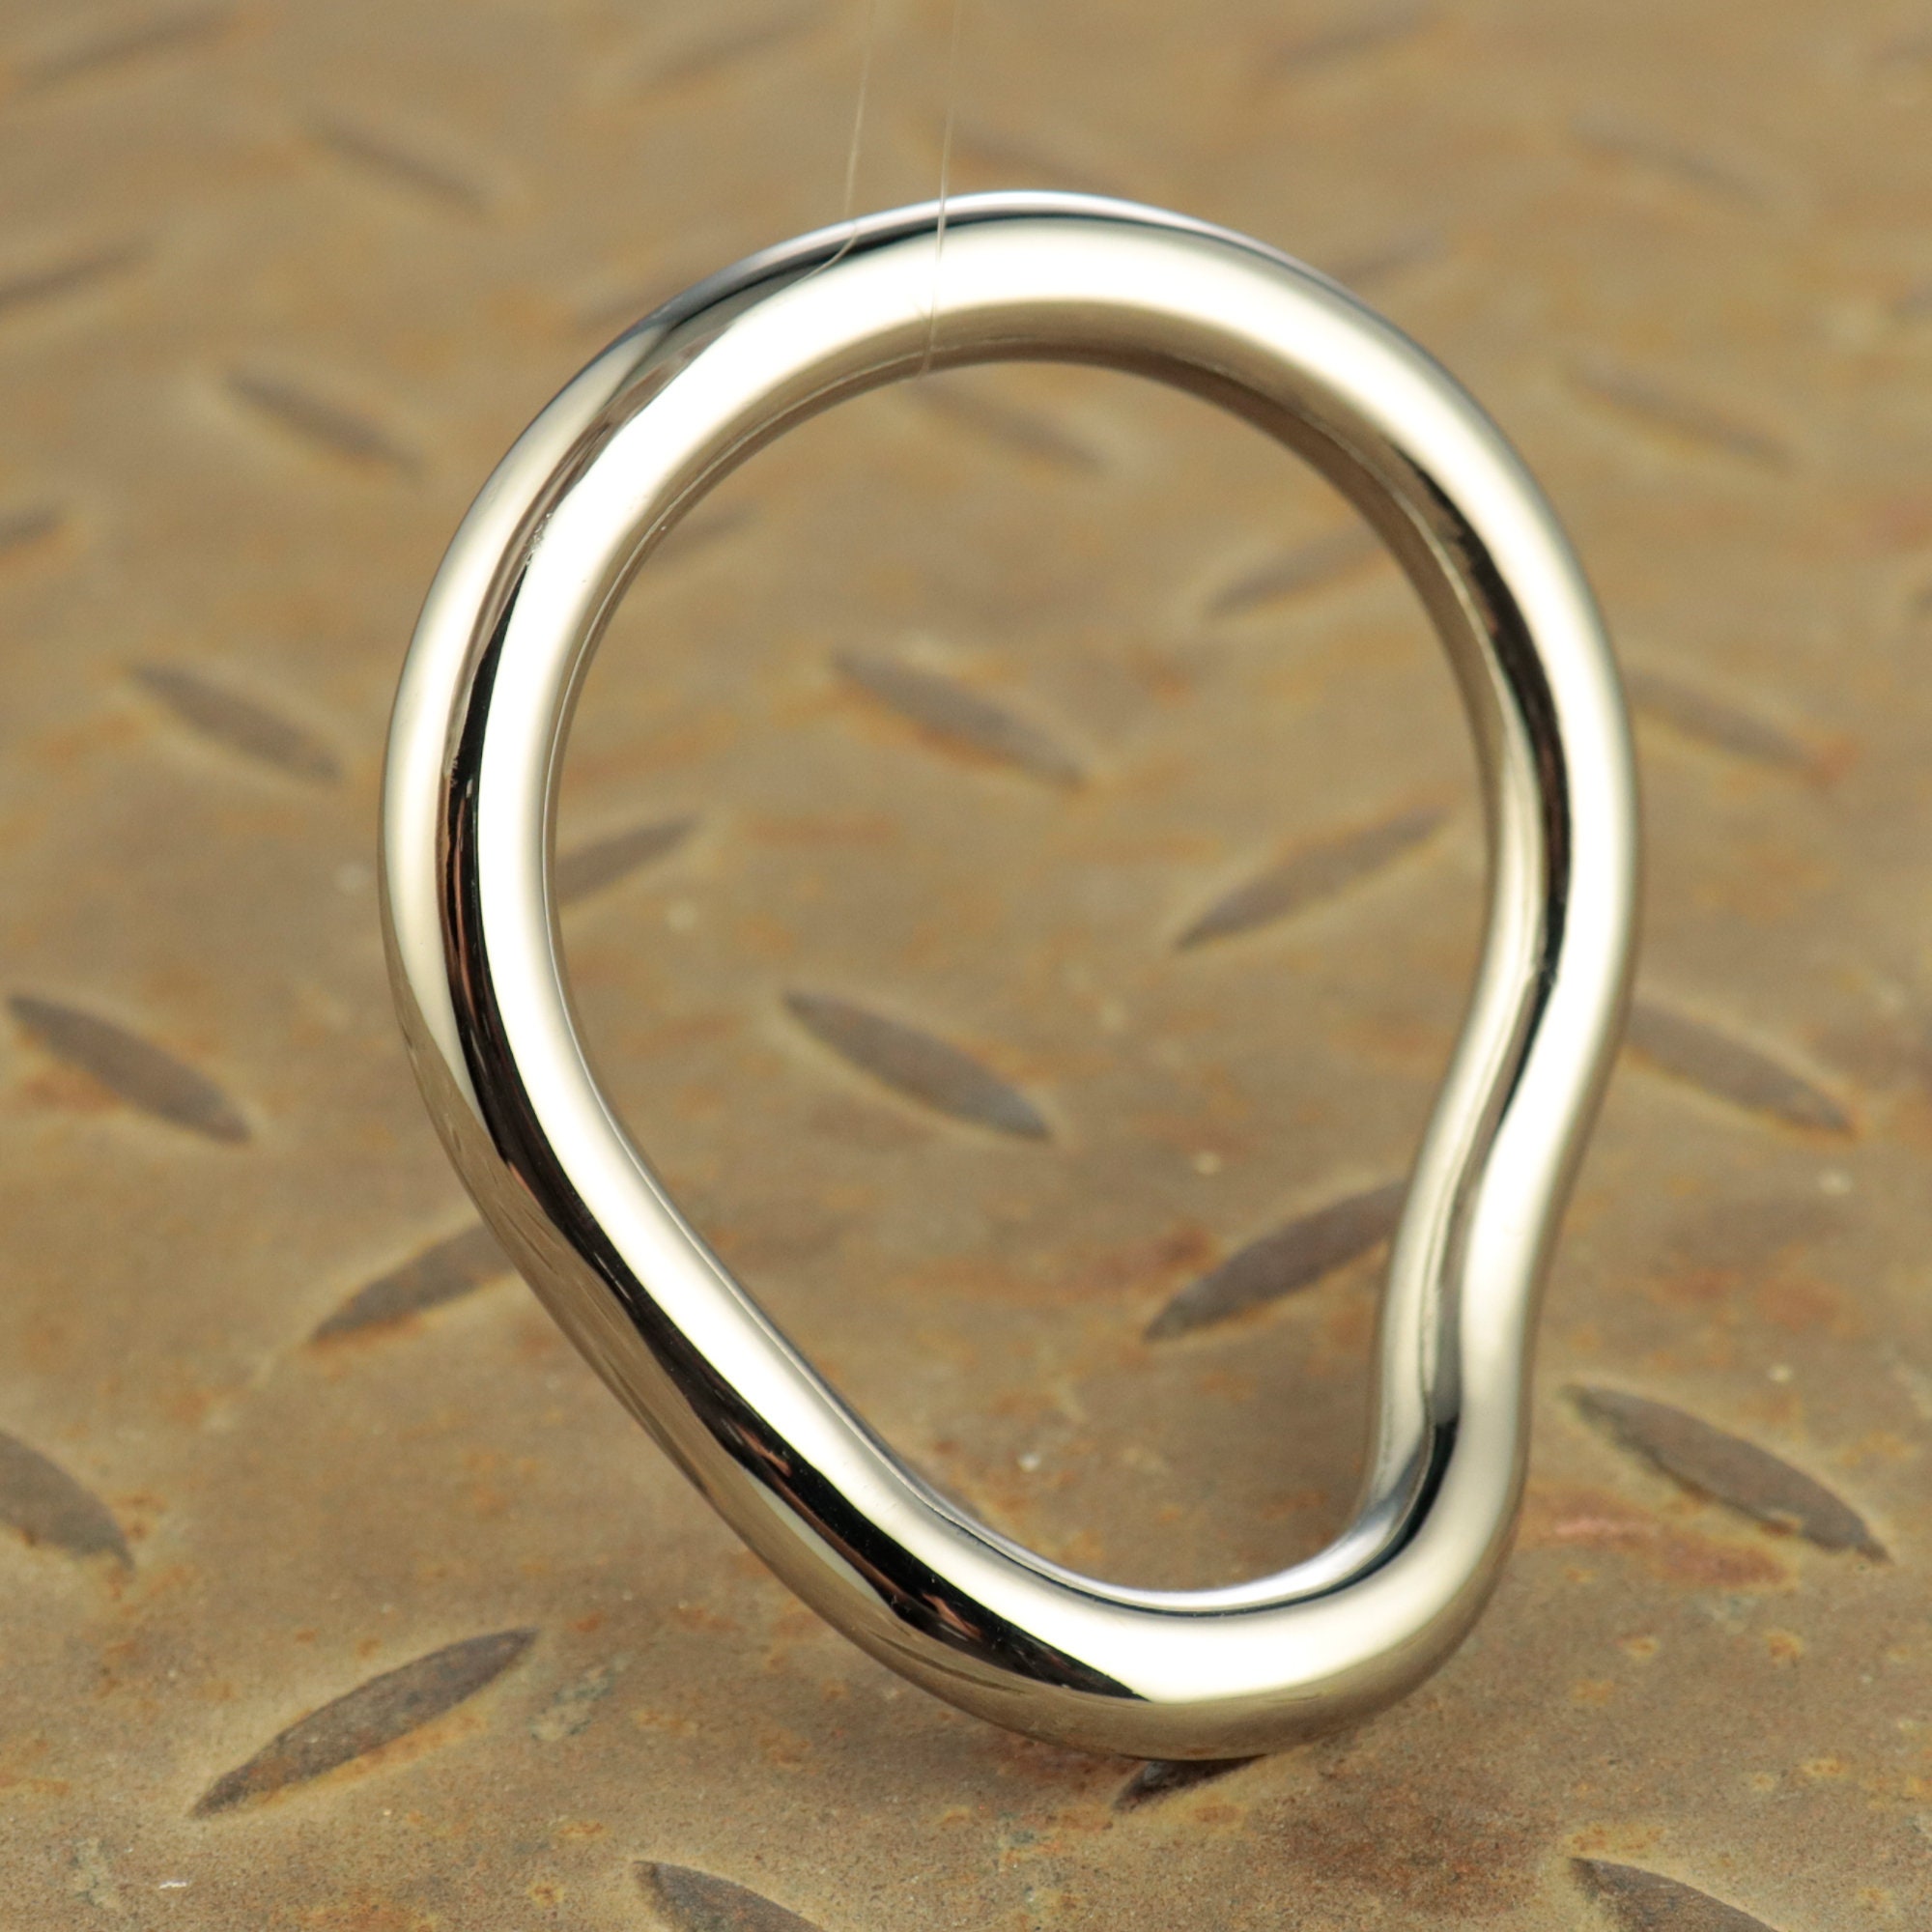 Stainless Steel Metal Cock Ring Metal Penis Ring,Made of Curved Stainless  Steel Arc Ringand Polished Without Edges (L)